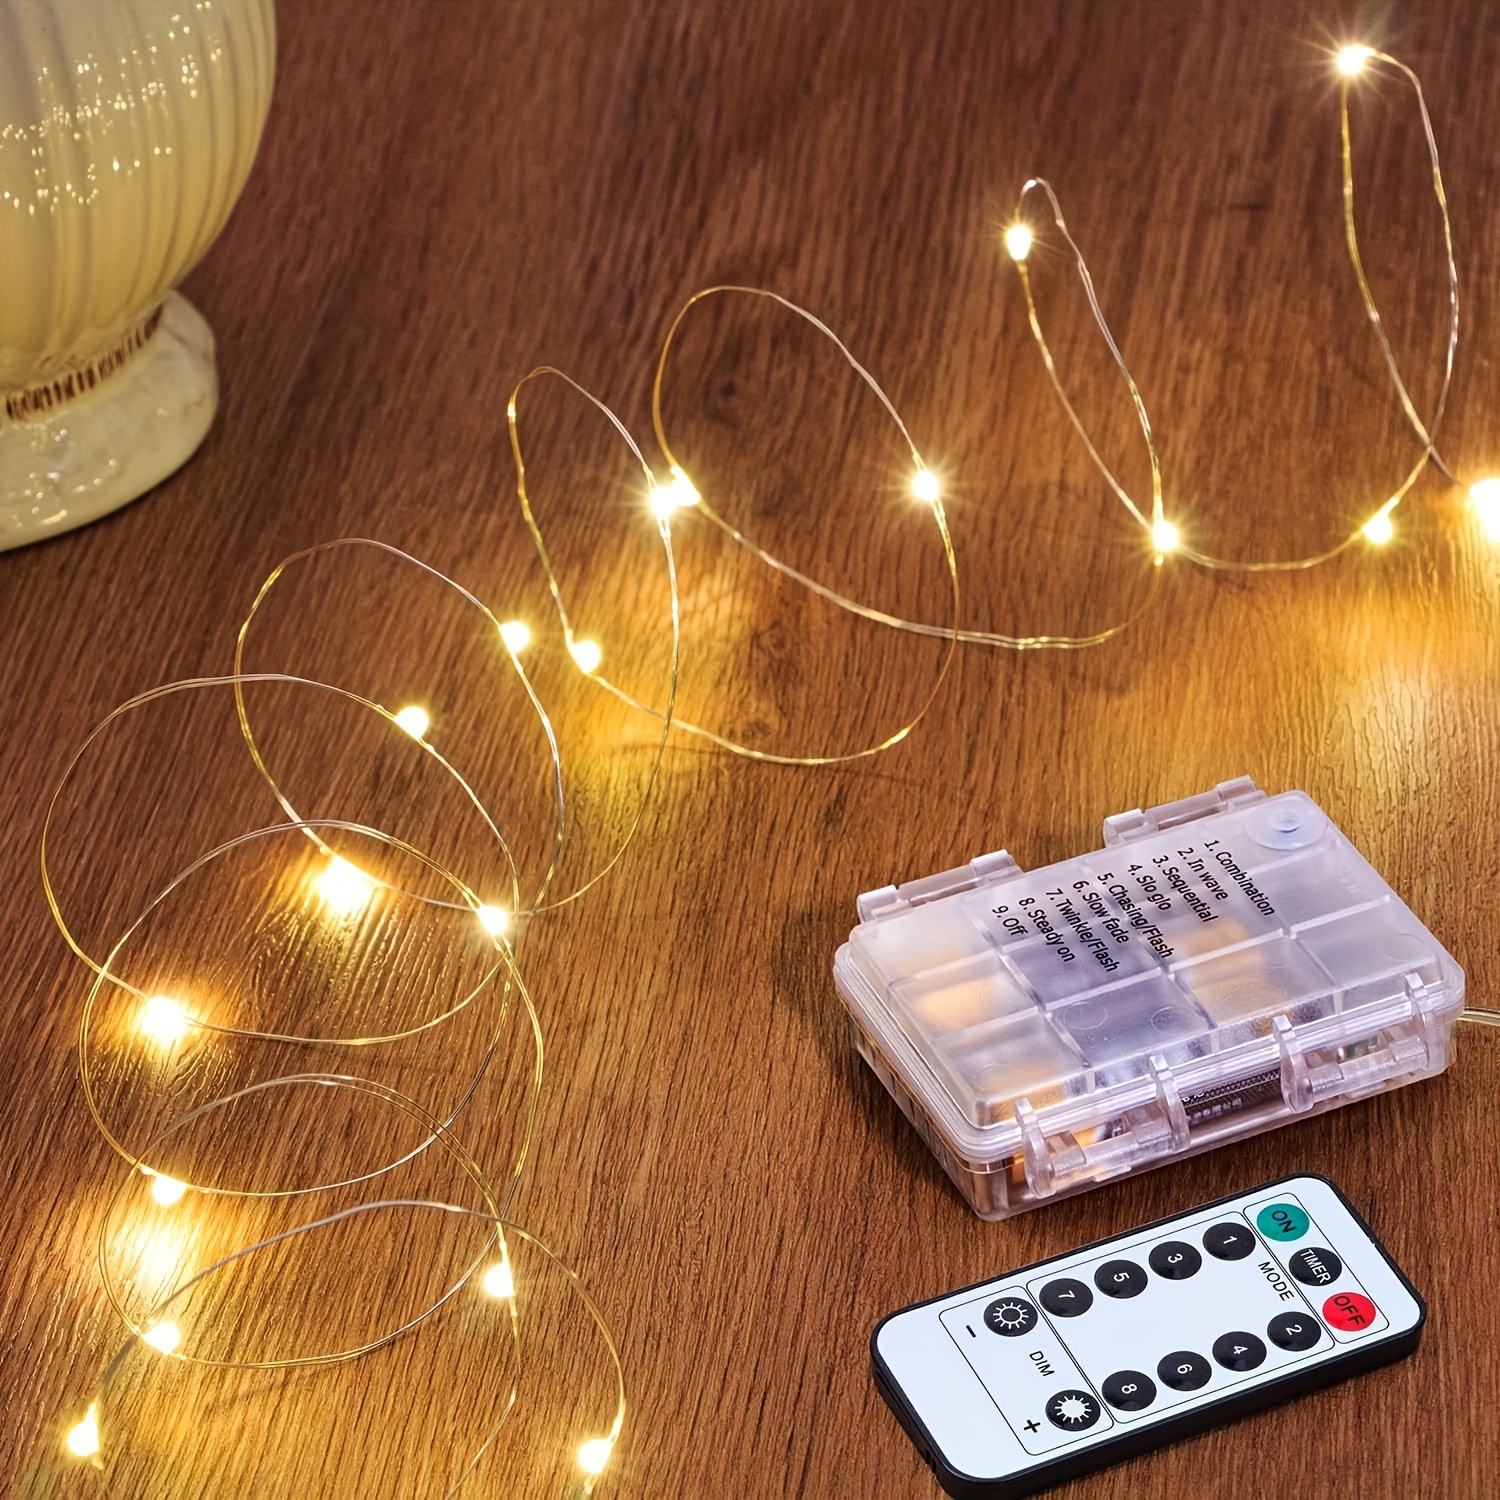 1 pack led fairy lights battery operated with remote control timer waterproof copper wire twinkle string lights for bedroom indoor outdoor wedding dorm christmas halloween gift decor 3 15x1 94